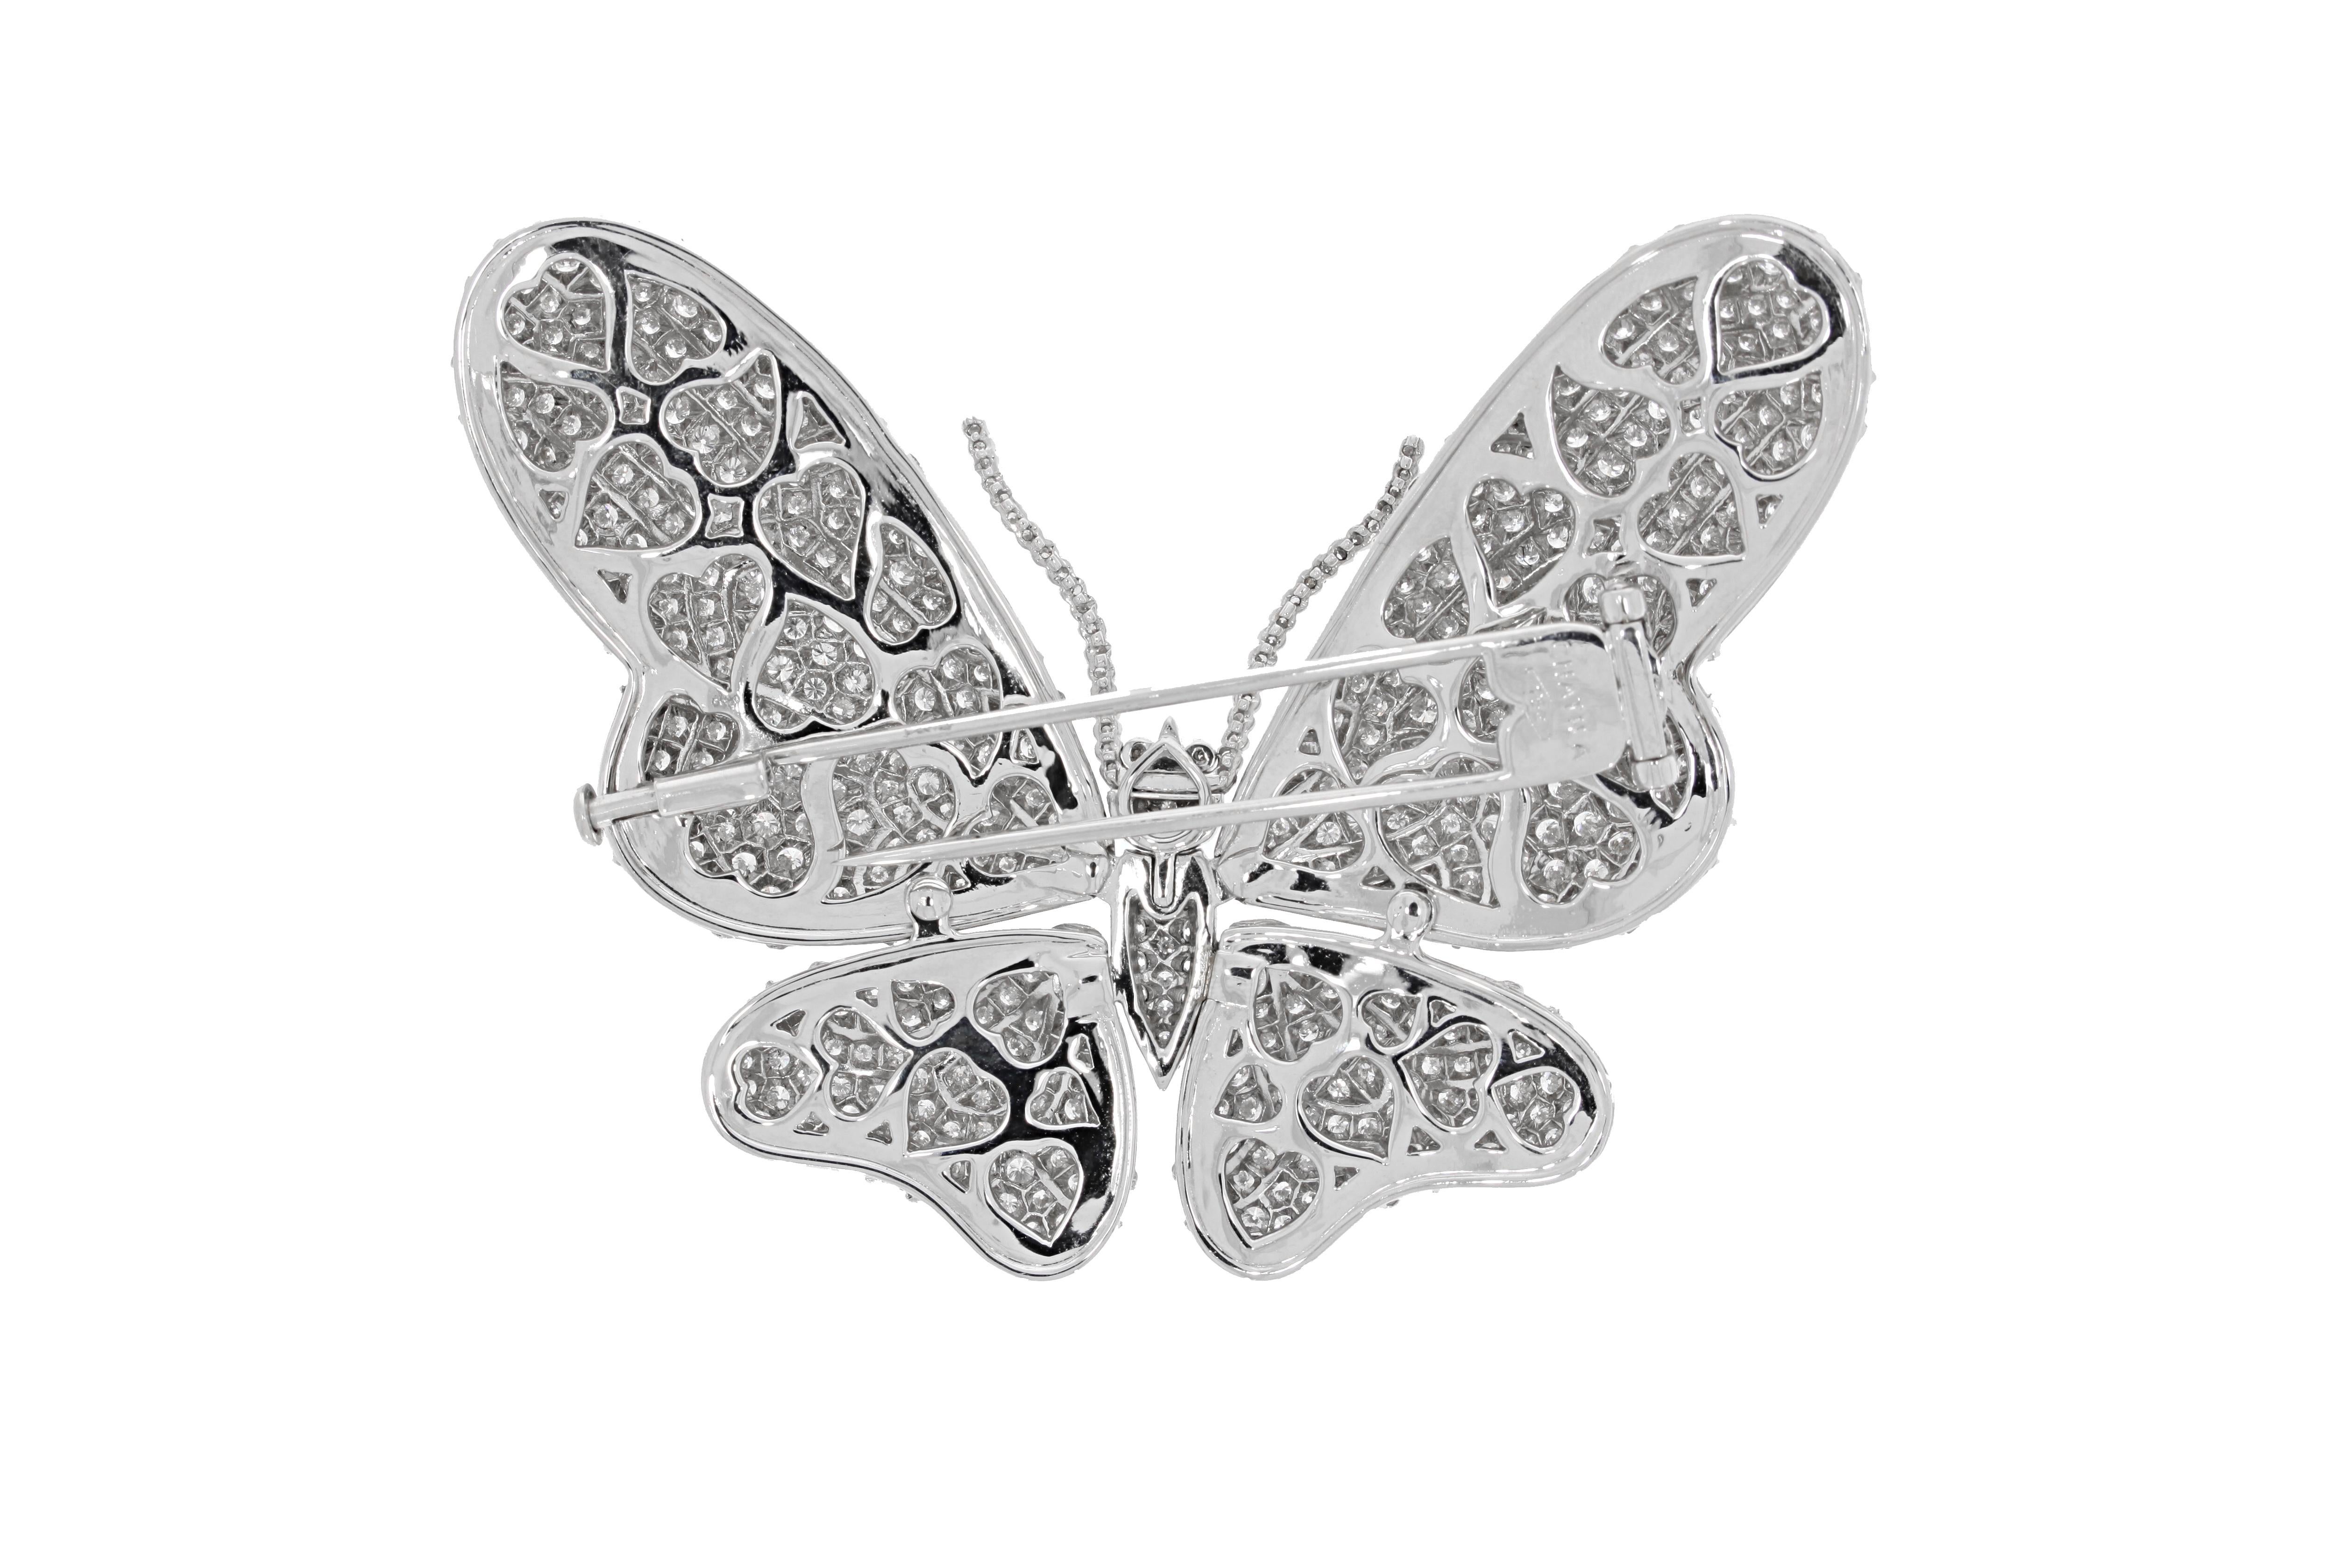 This eye-catching 18 carat white gold embellished butterfly brooch by Chatila embodies the delicate grace, freedom, and enchantment of natures creation also referred to as 